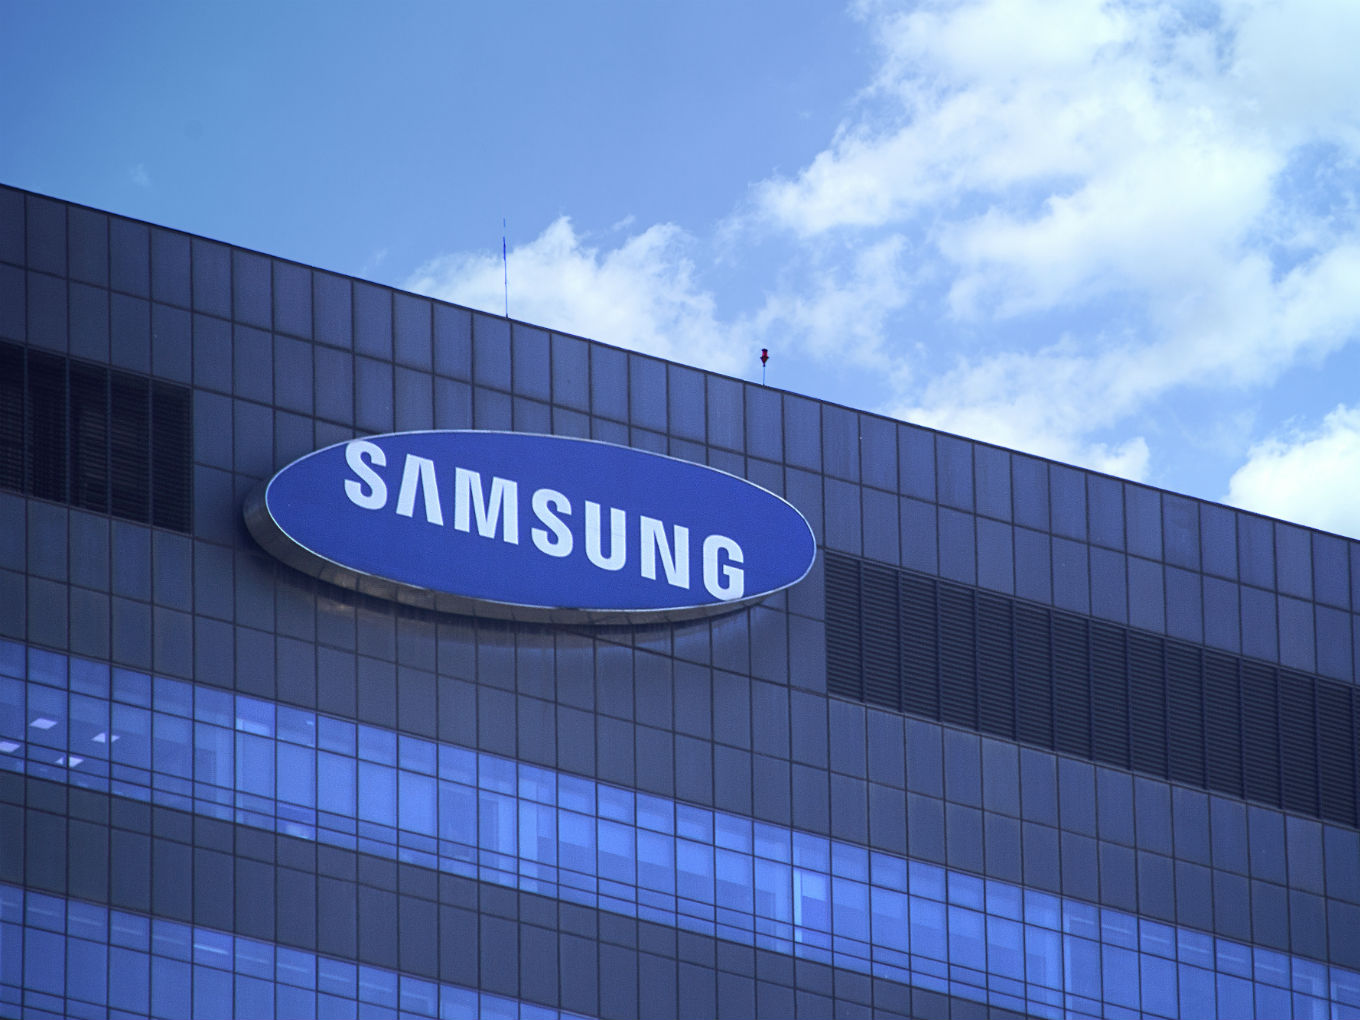 Samsung Venture Capital Corp Invests $8.5 Mn In Four Indian Startups